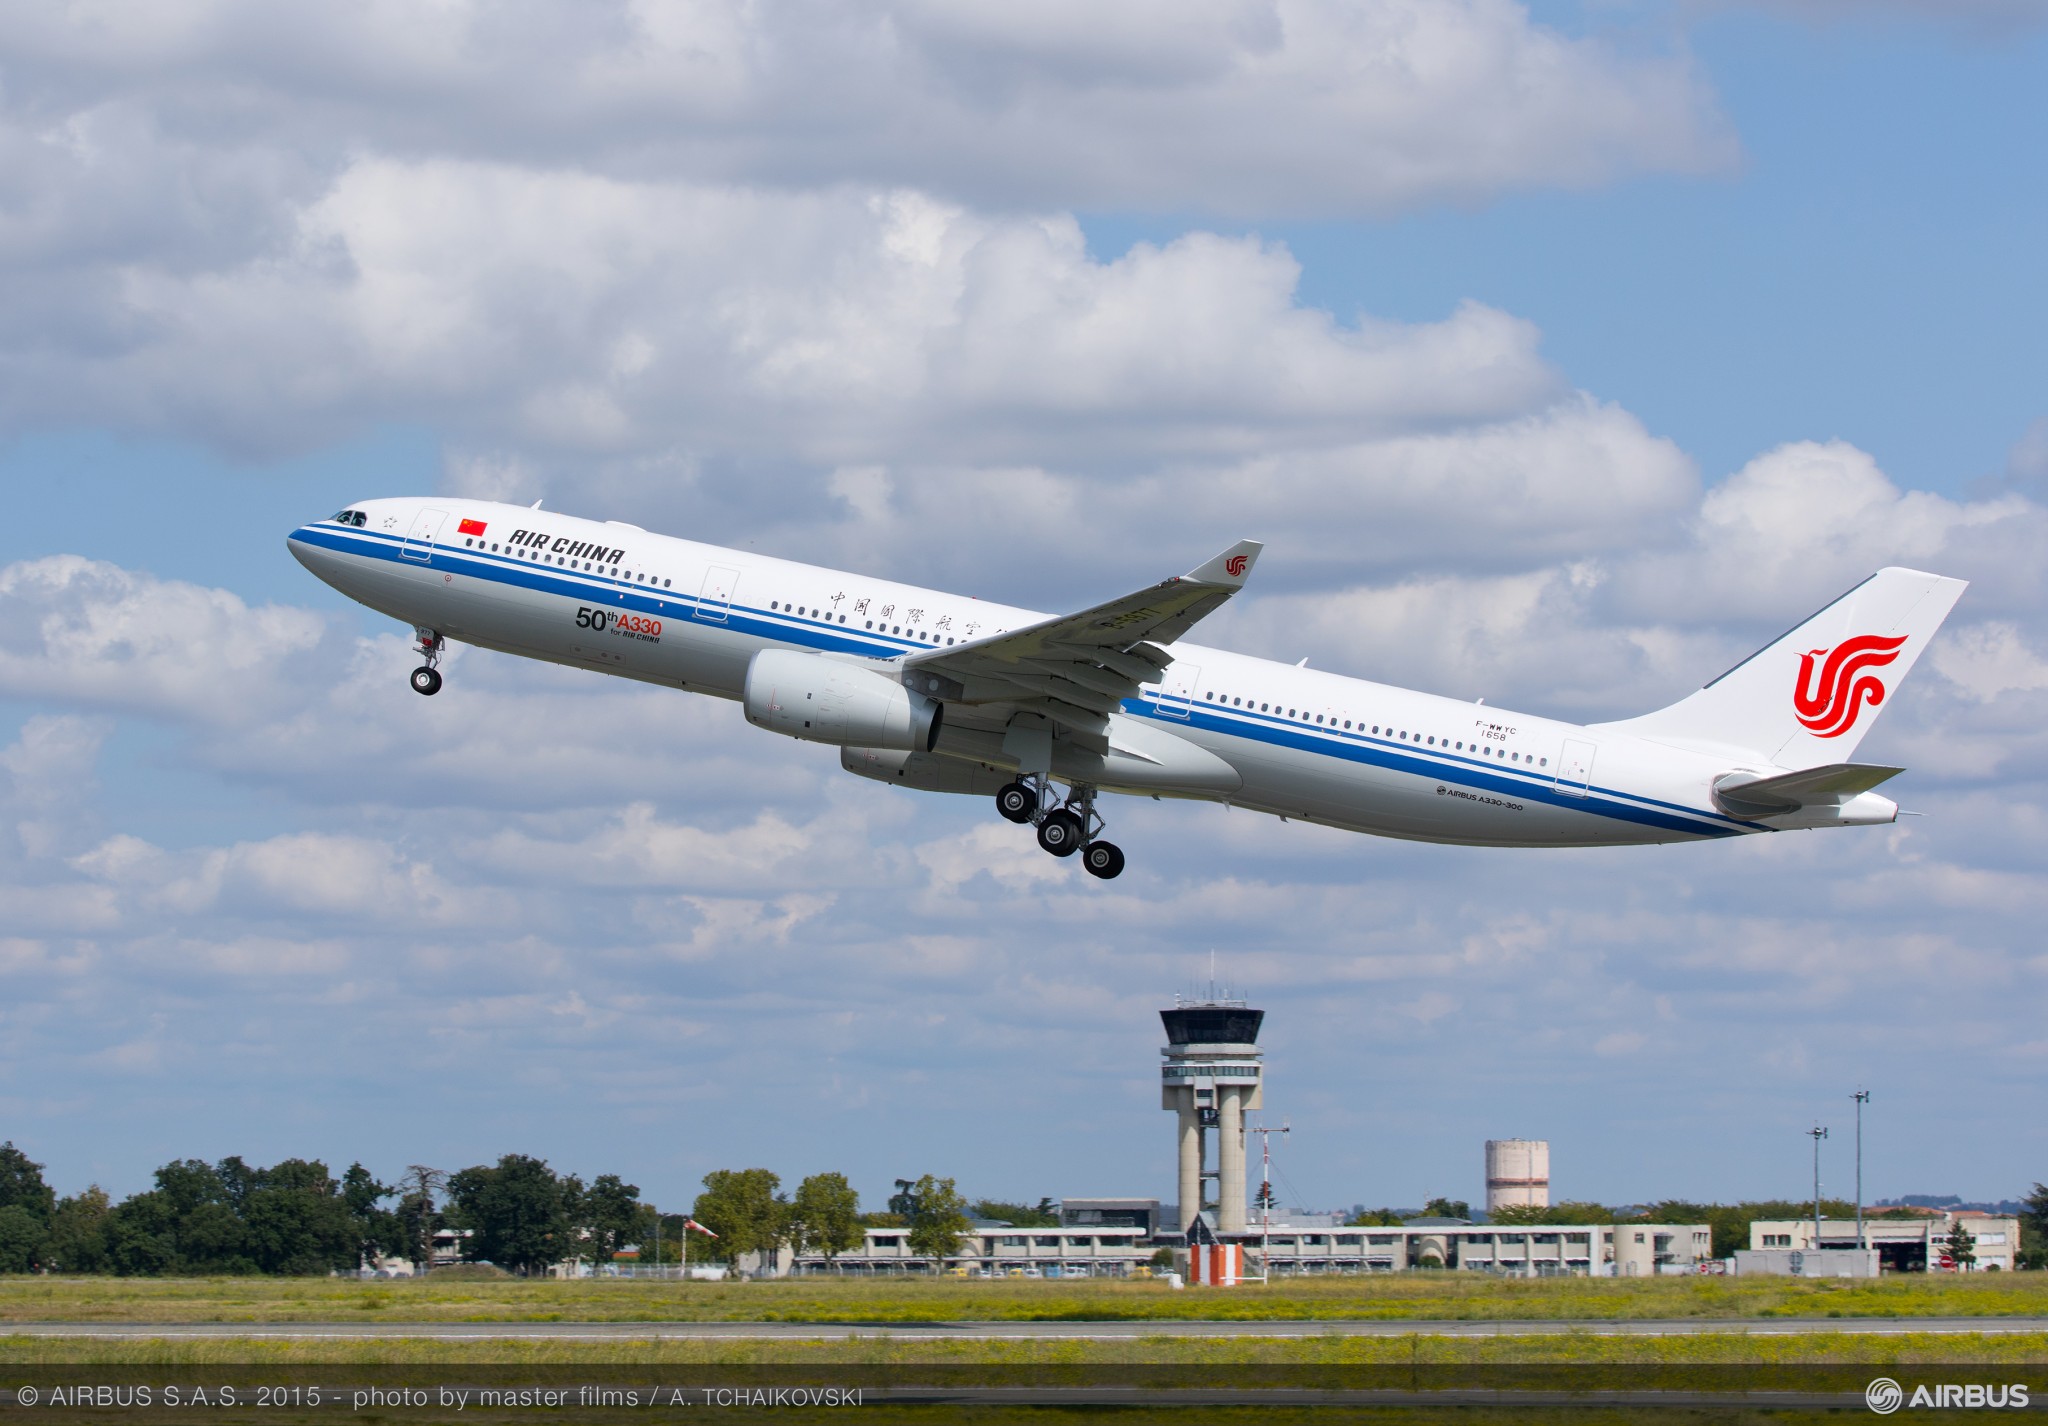 BOC Aviation and Air China enter into purchase-and-leaseback arrangement for five new aircraft